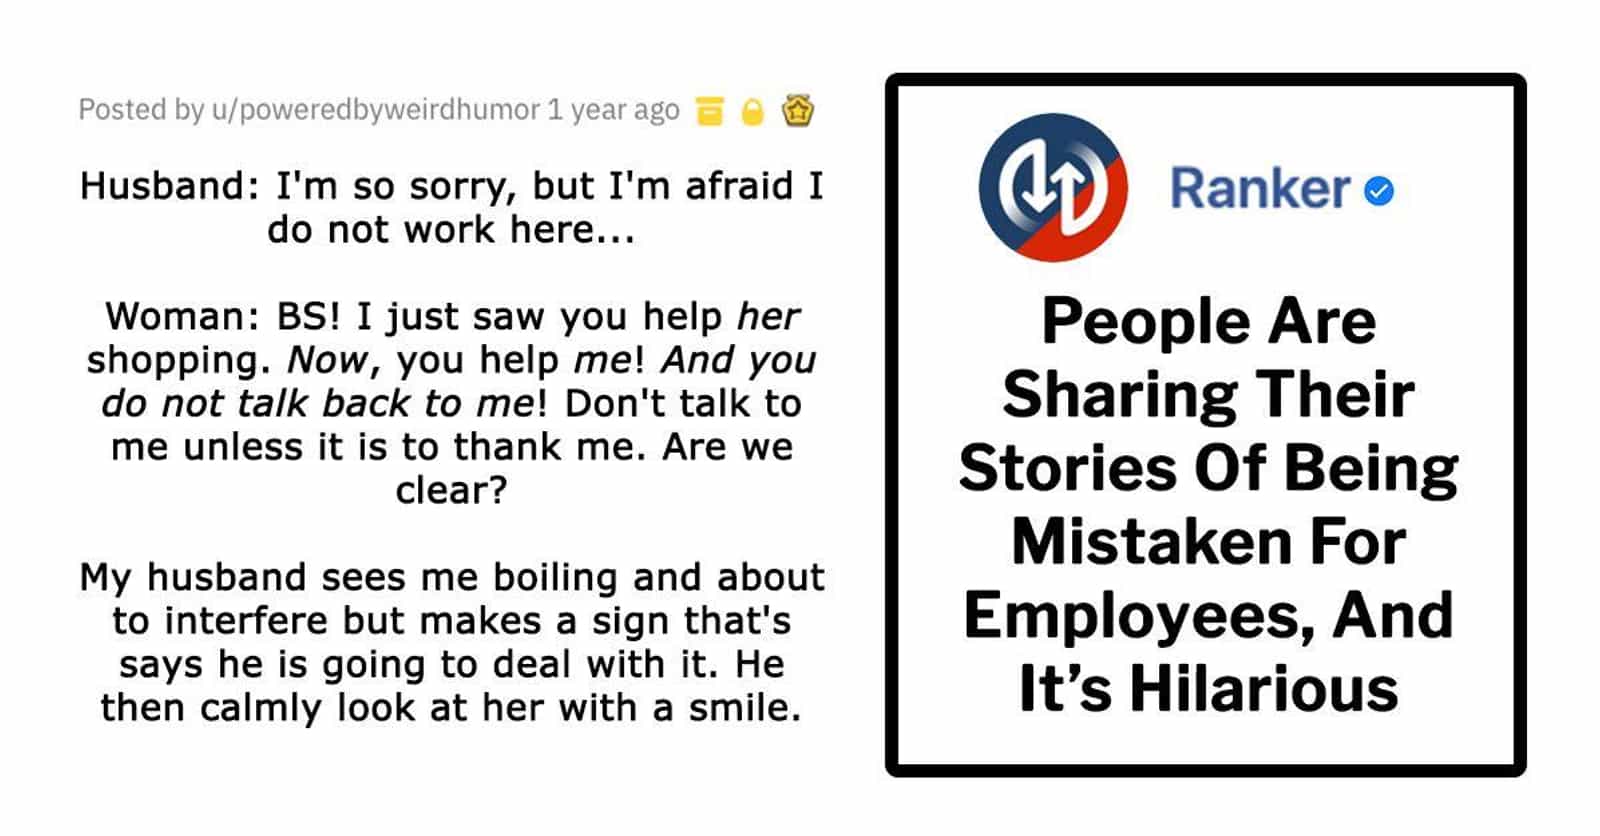 People Are Sharing Their Stories Of Being Mistaken For Employees, And It’s Hilarious